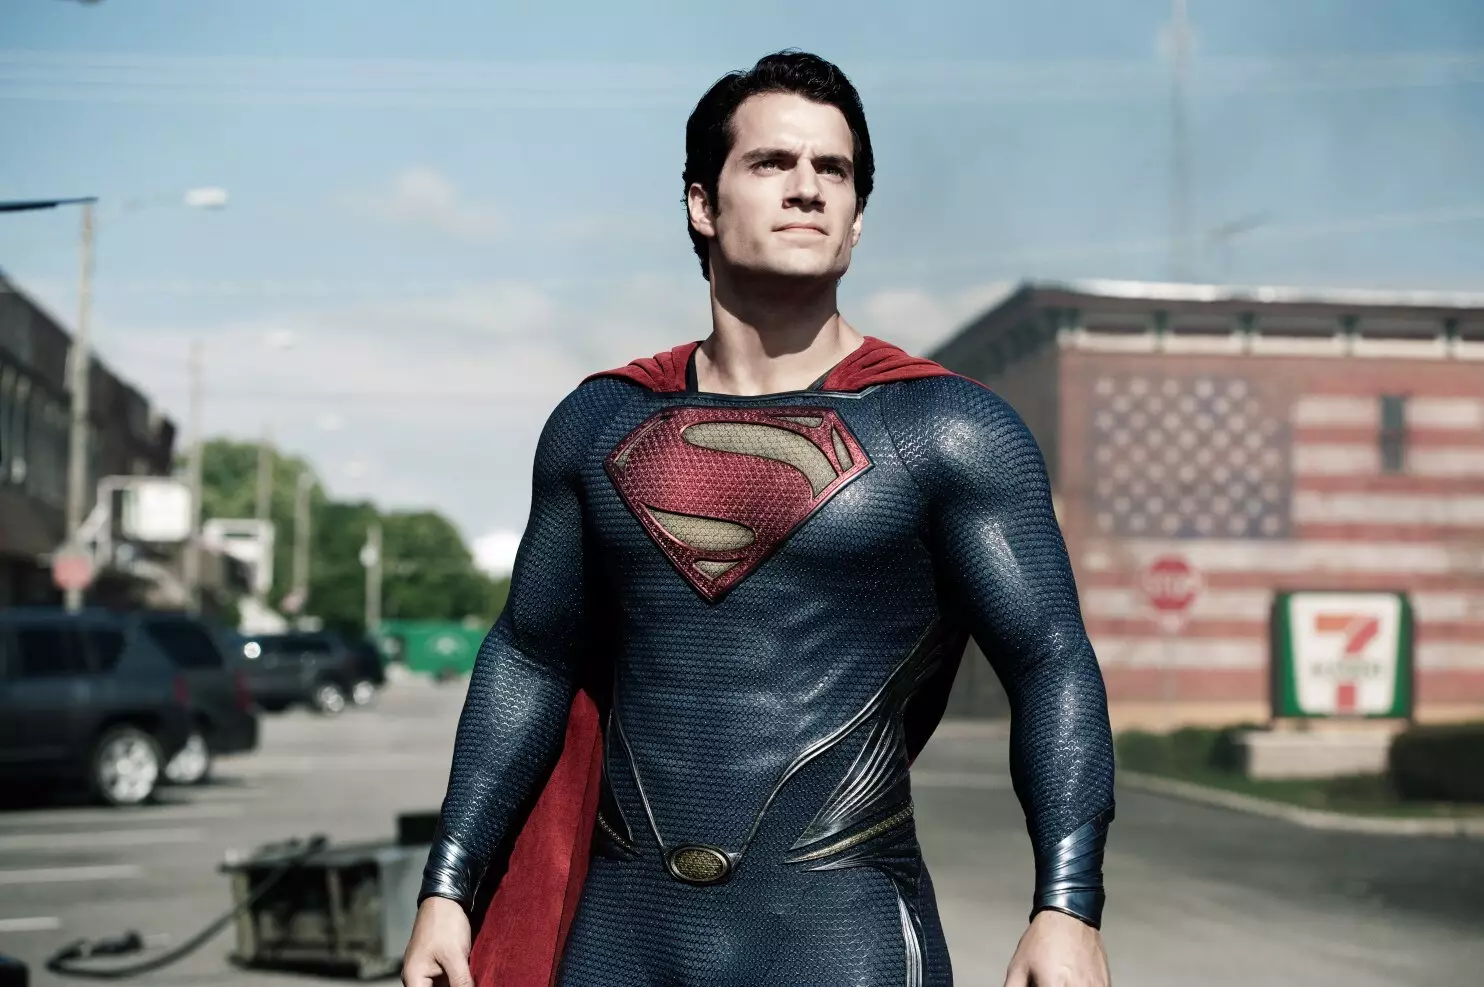 Henry Cavill has revealed he wants to play Superman for 'years to come'.